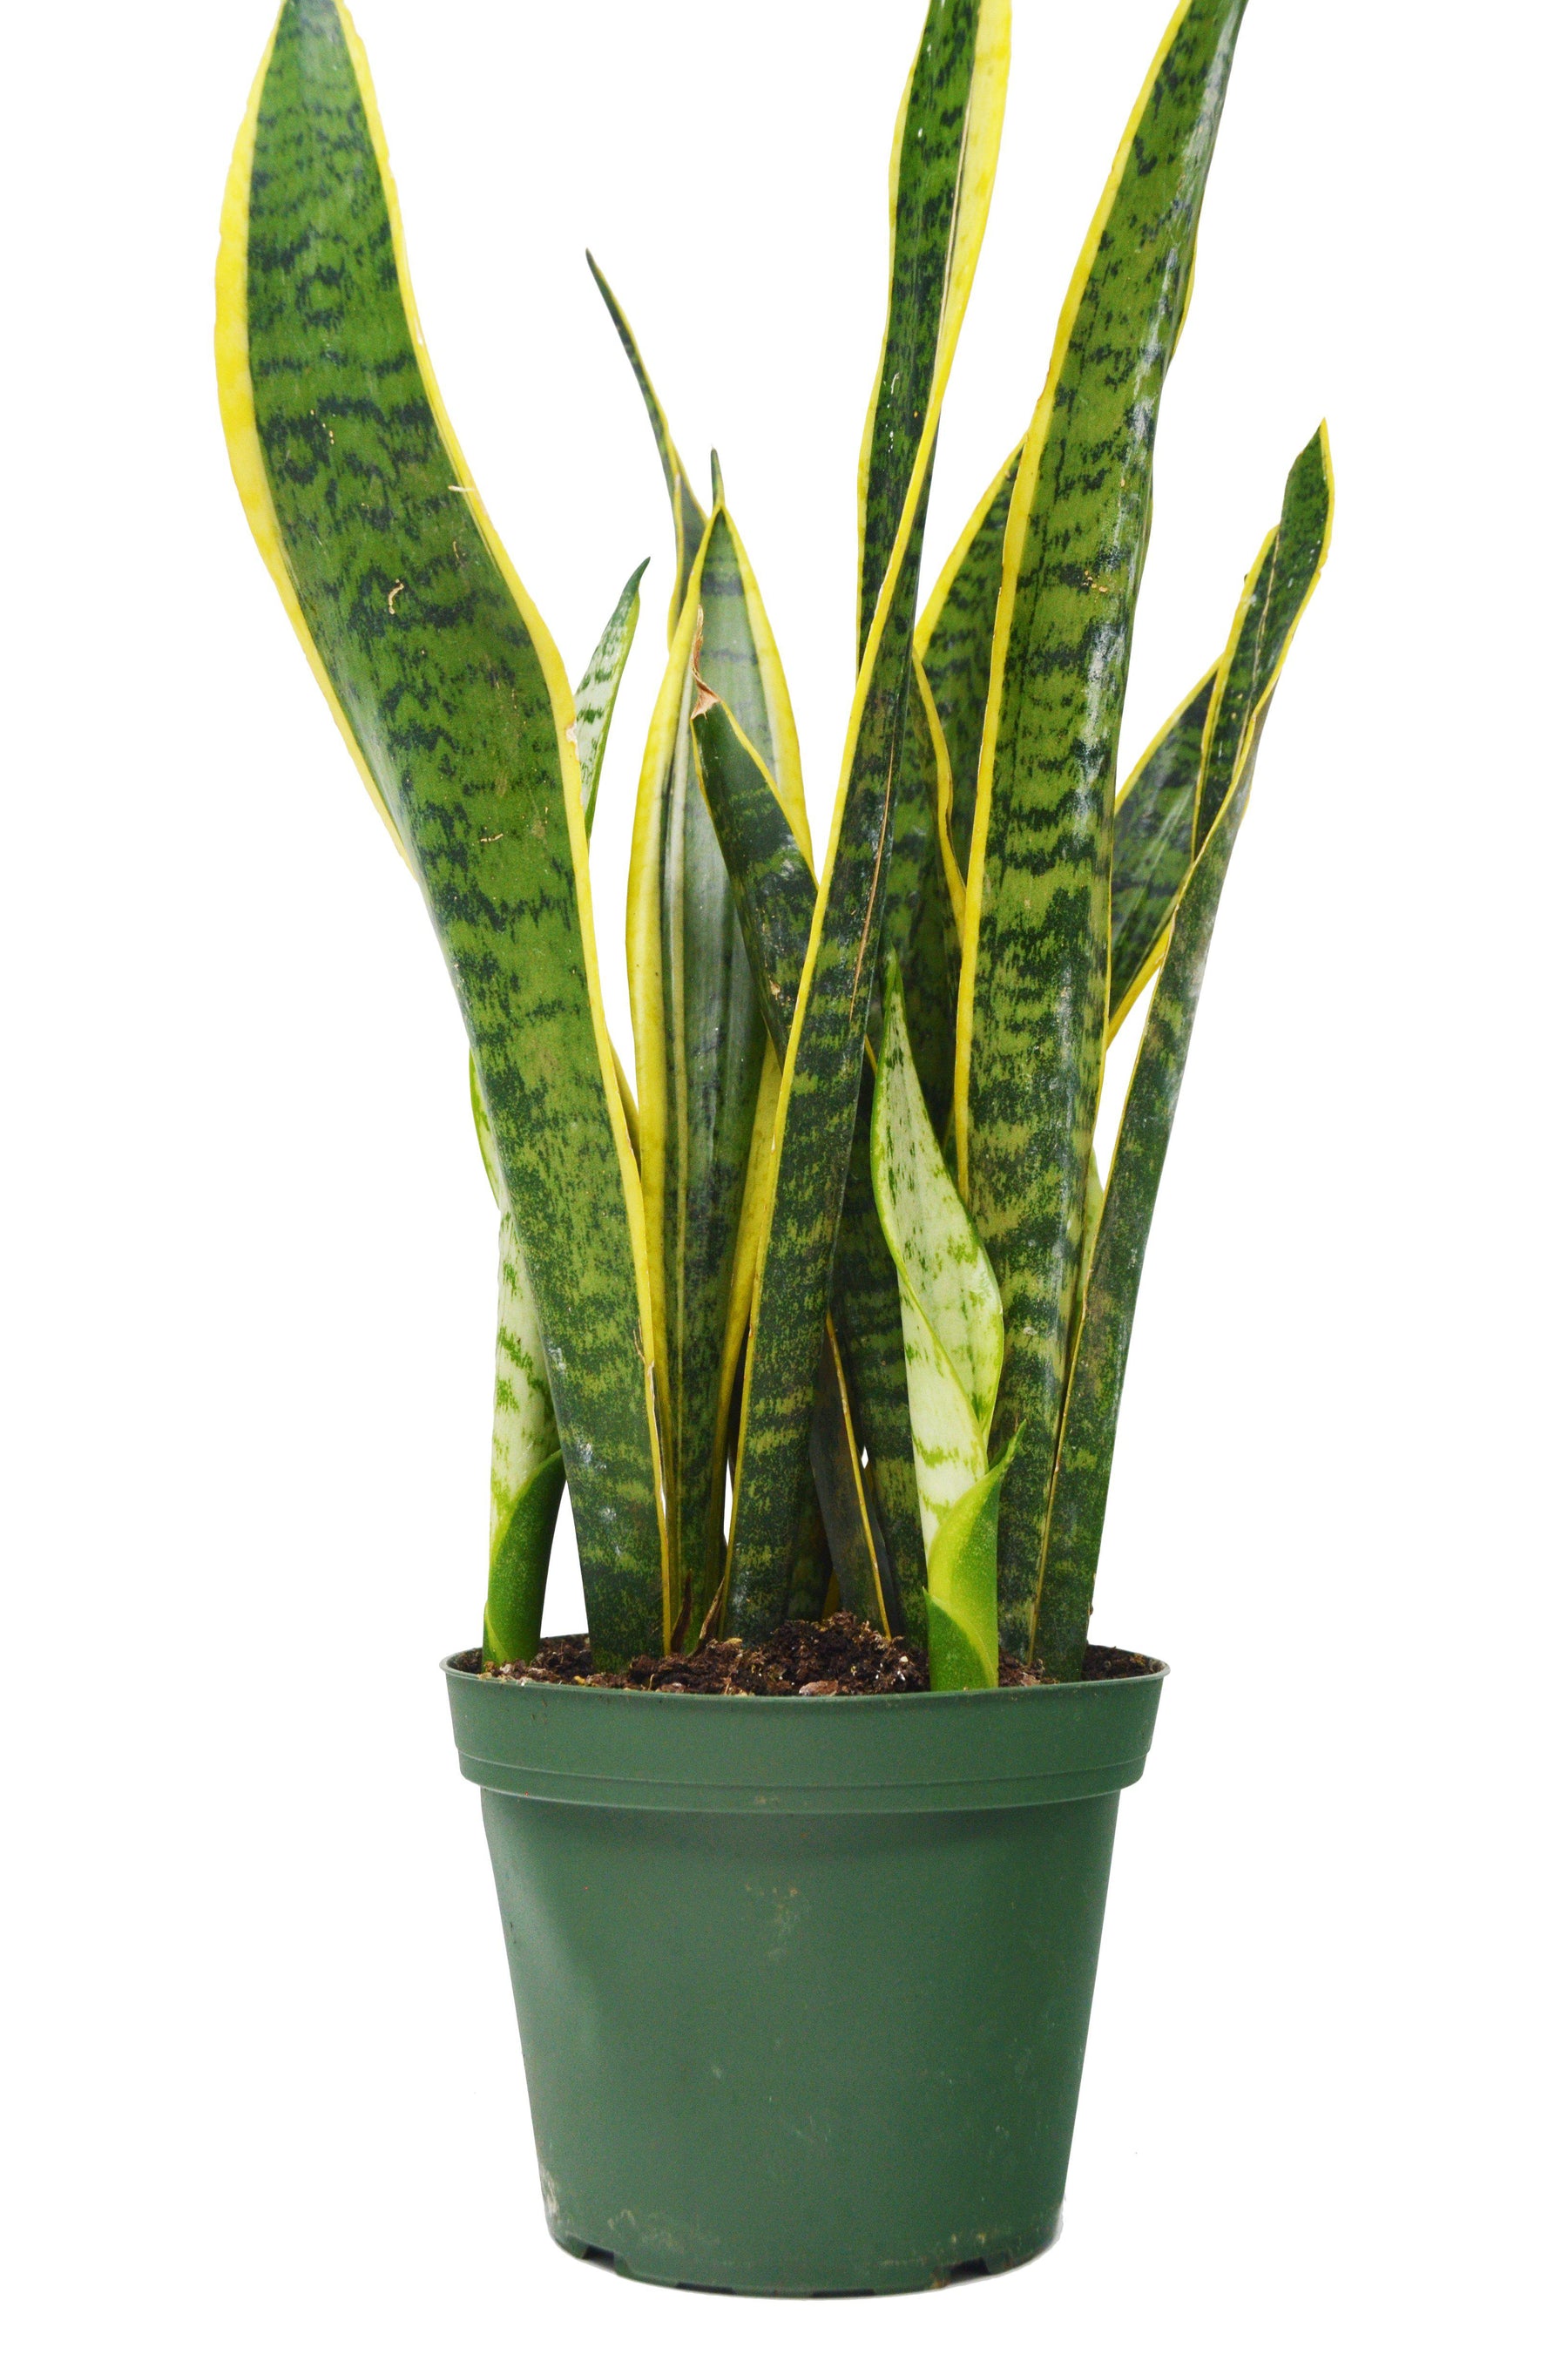 Why we love the 'Snake Plant' - Sansevieria - Mother-in-Law's Tongue